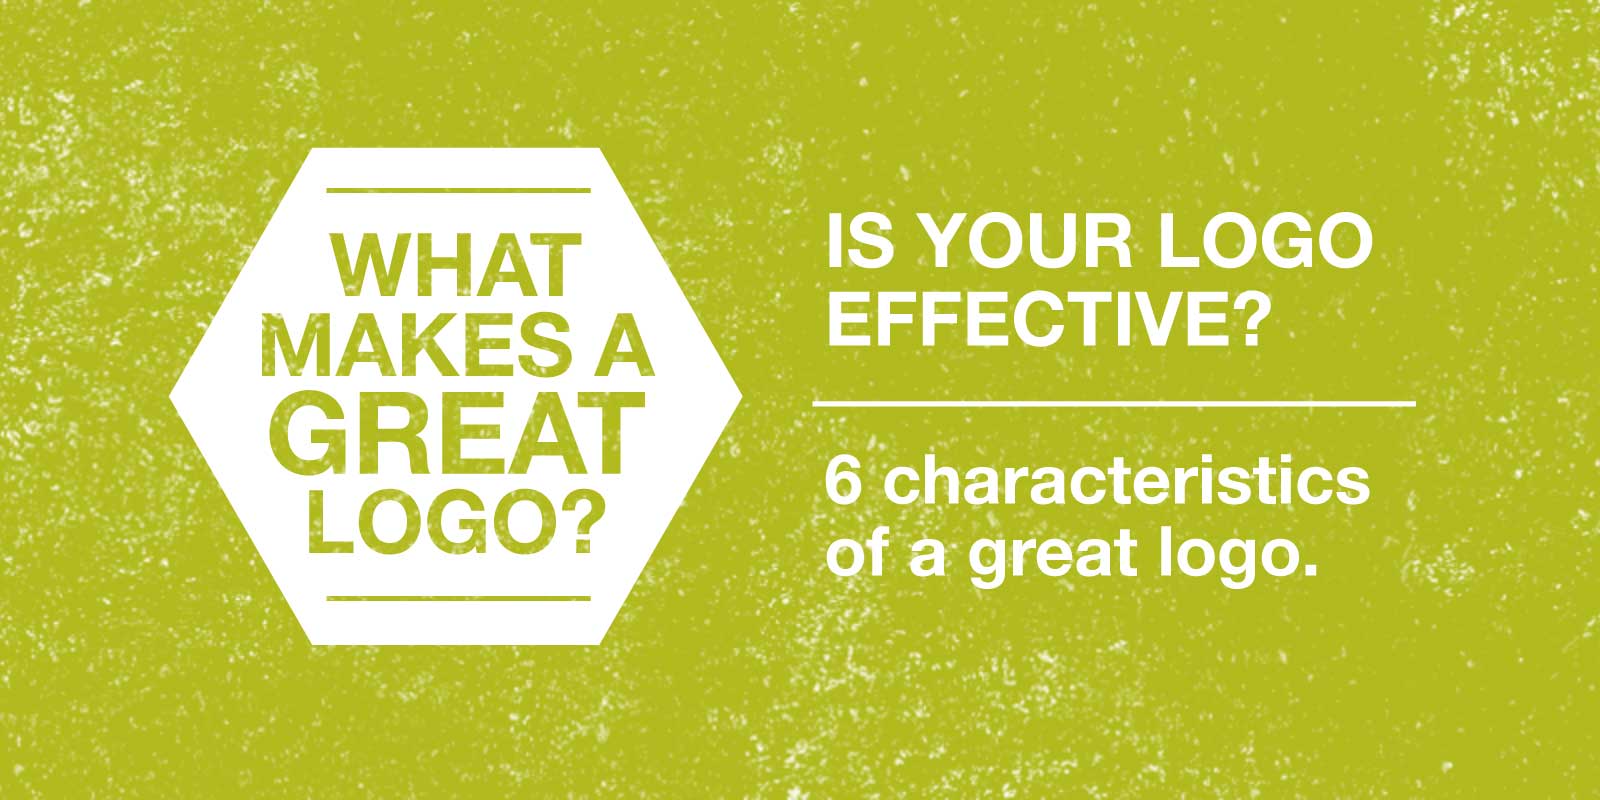 What Makes a Great Logo? – 6 Characteristics of an Effective Logo